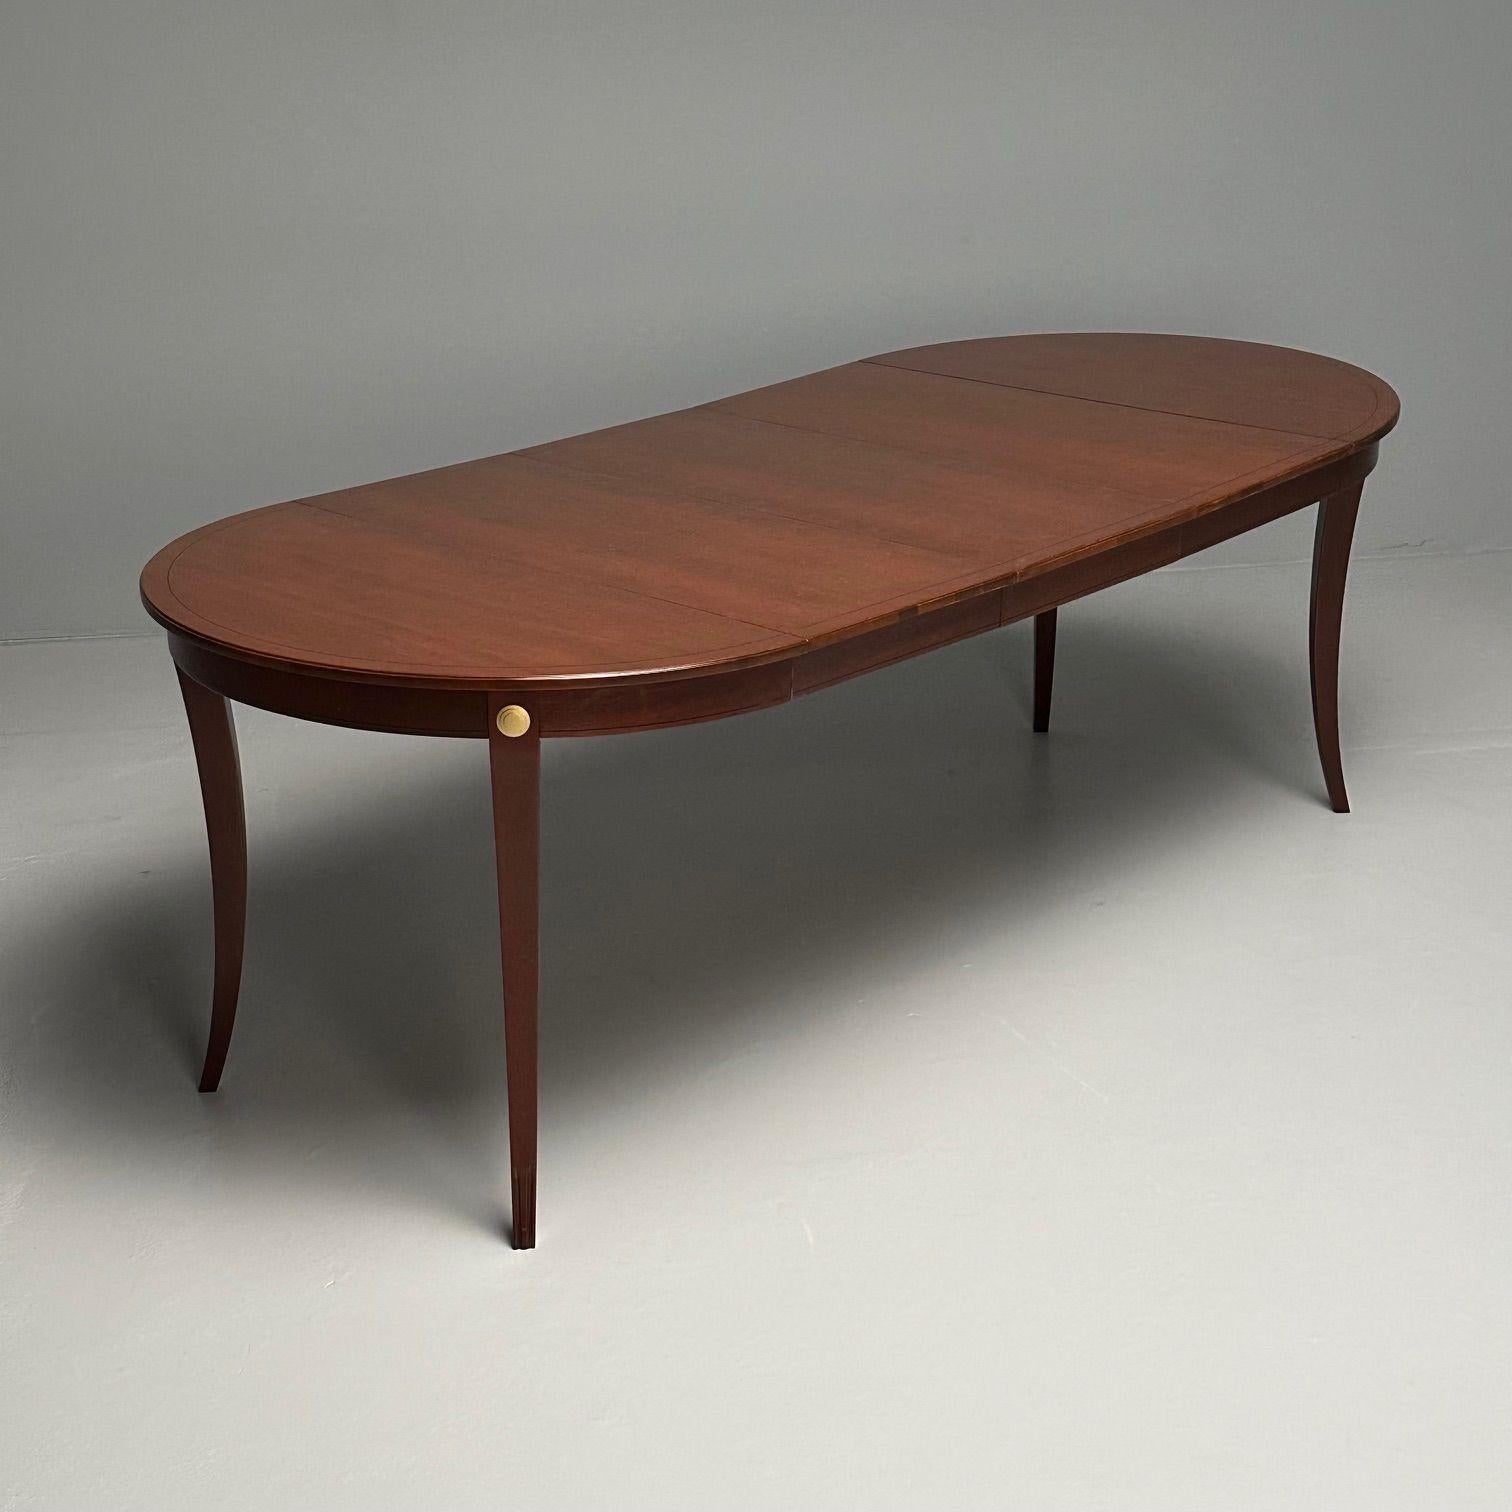 Tommi Parzinger, Charak Modern, Mid-Century Modern, Dining Table, Bleached Mahogany, Brass, 1954

Modern dining table designed by Tommi Parzinger (American, 1903-1981) and produced by Charak Modern in the United States. The original Charak Modern